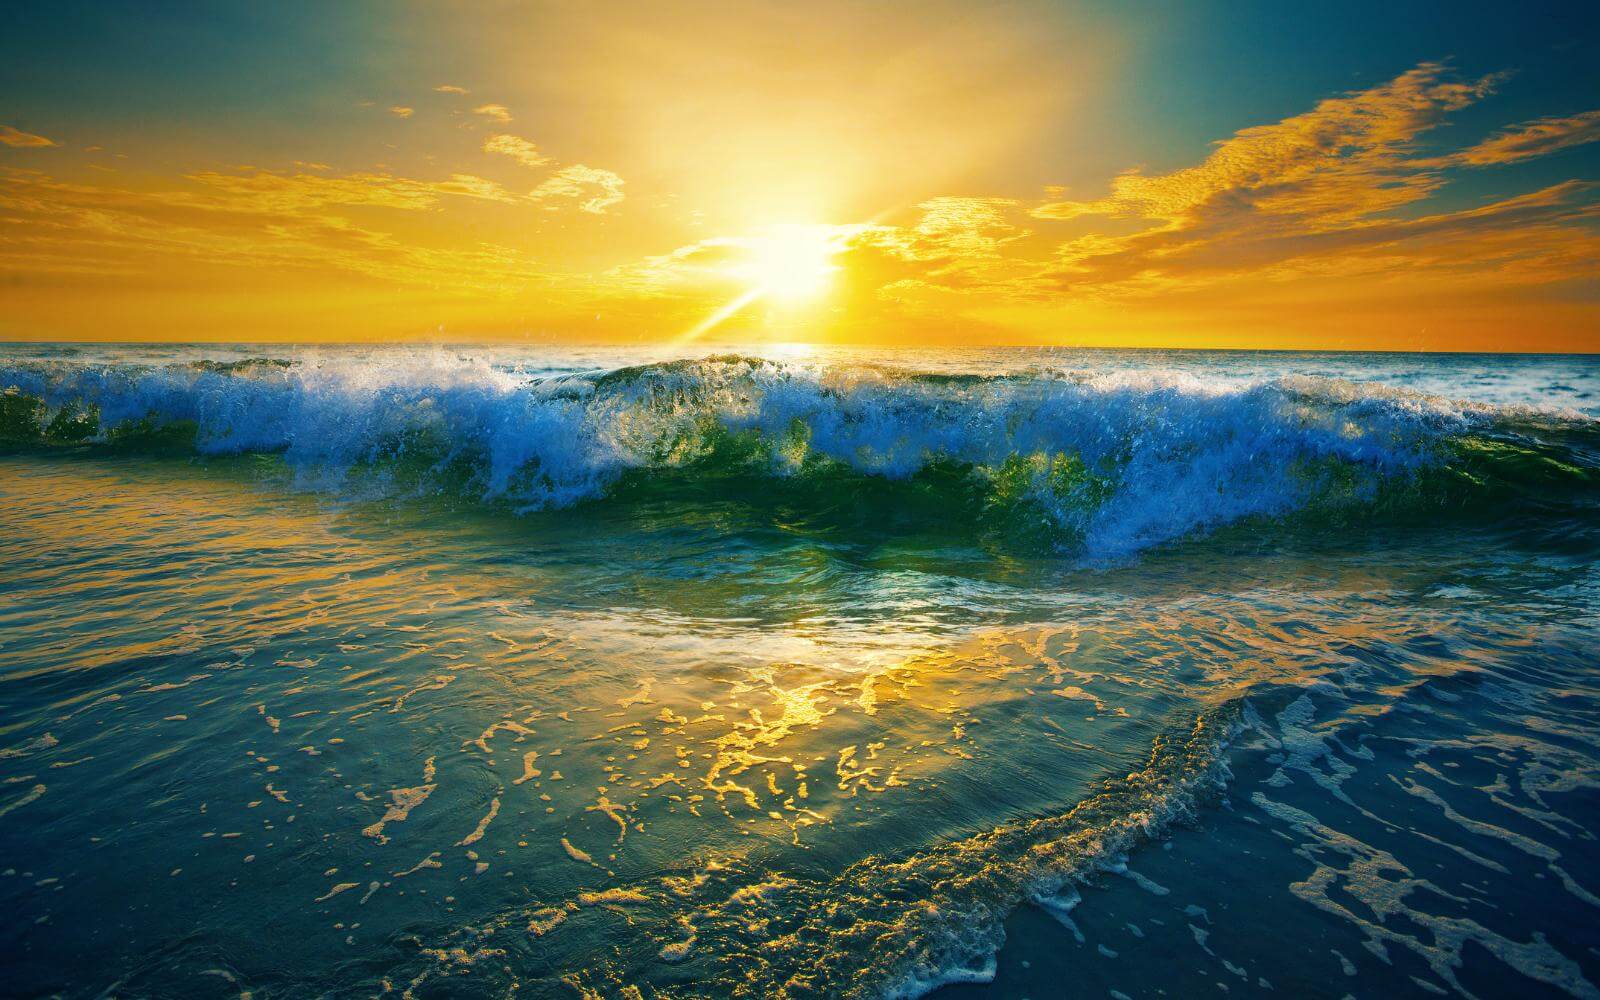 Pray For Our Oceans - Sunrise Over Waves